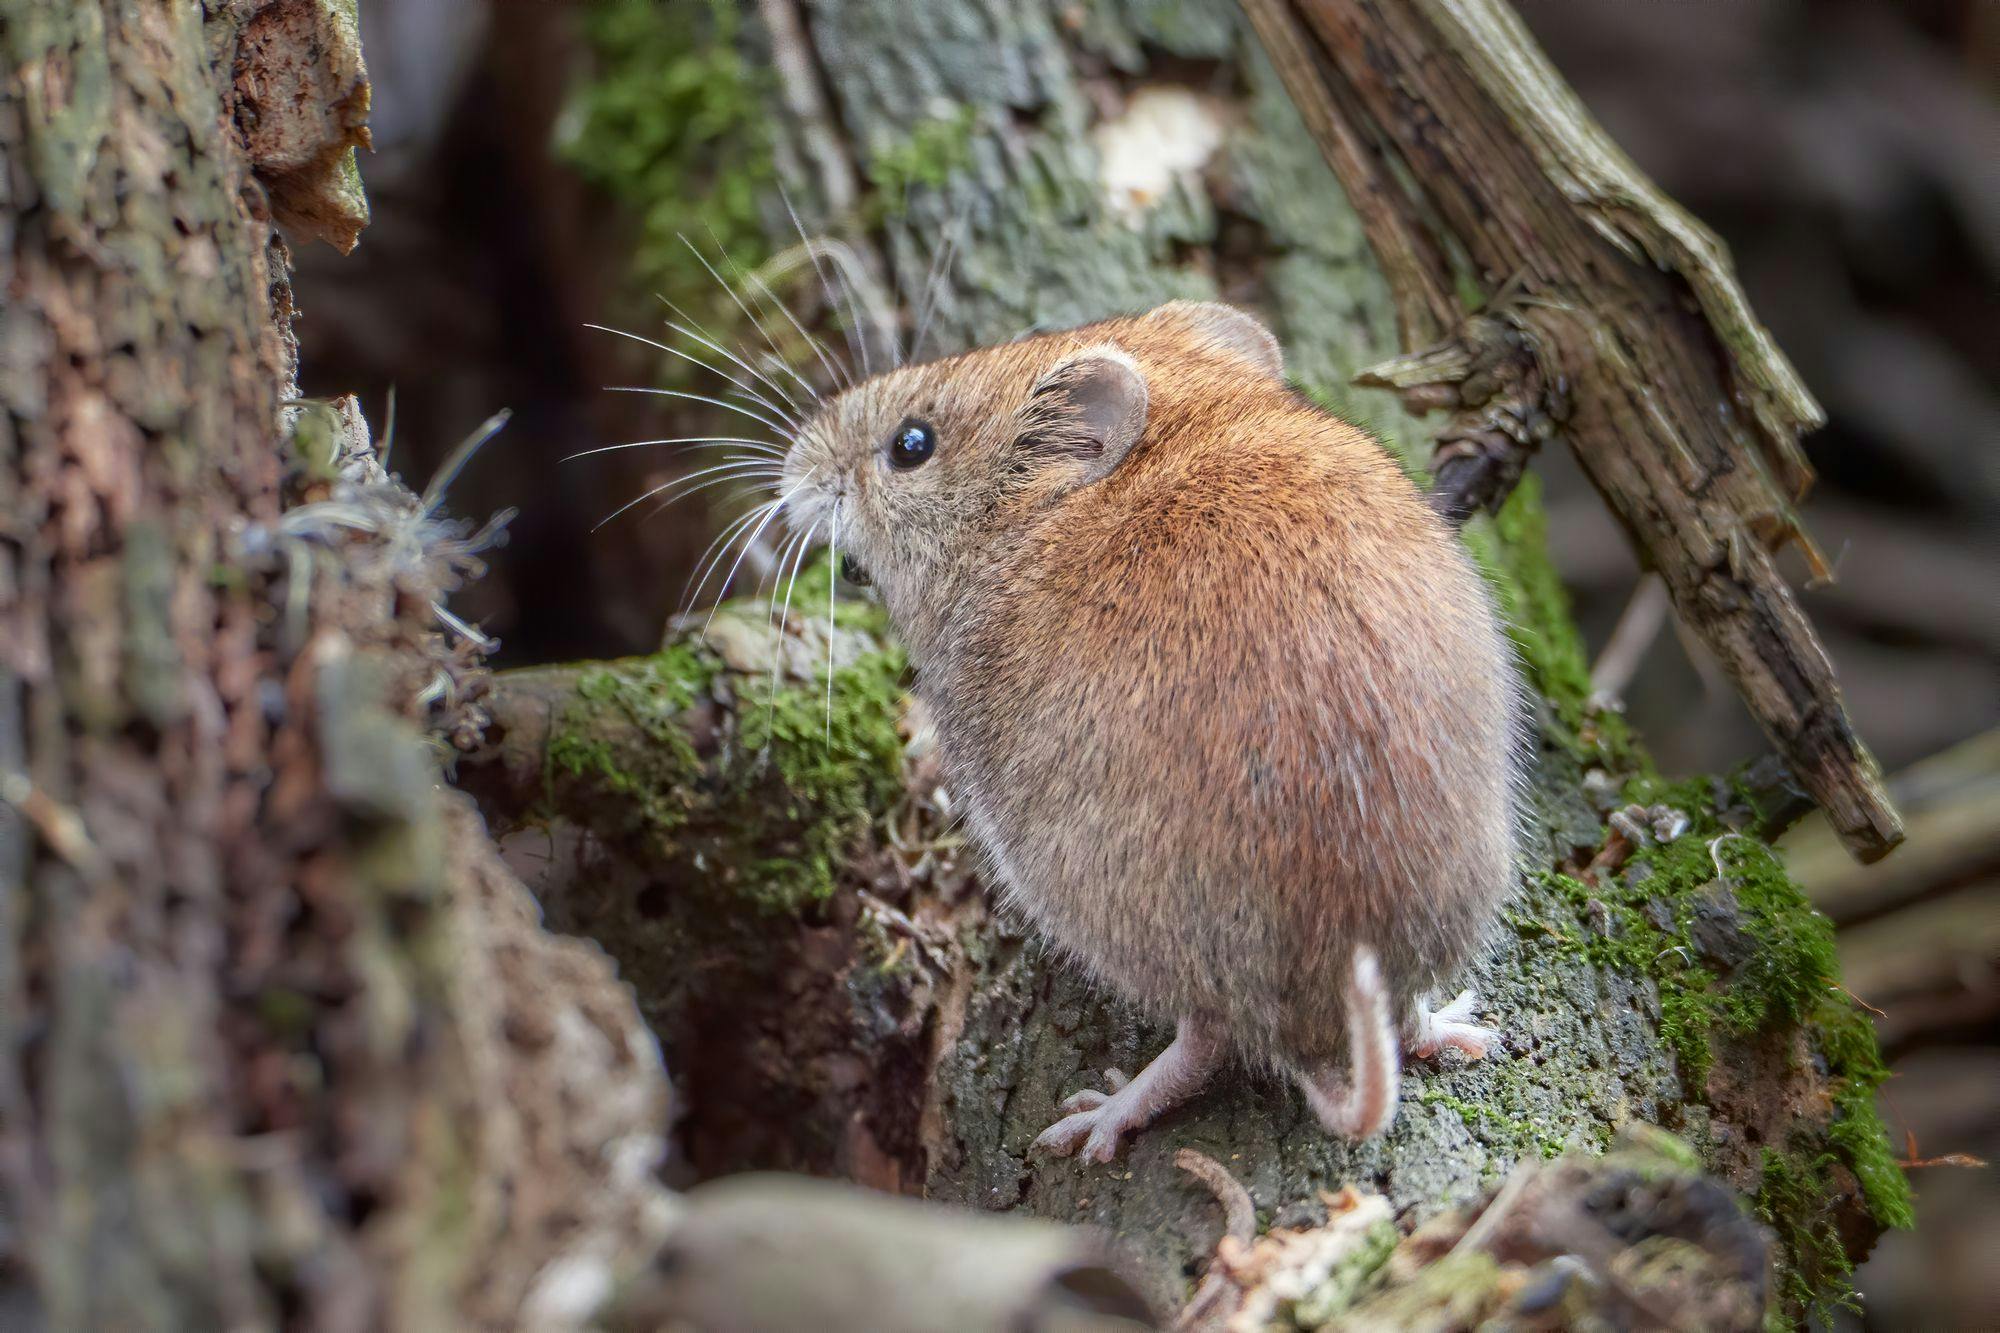 Discover the ultimate guide to rodent exclusion. Learn why traditional methods fall short and how a holistic approach can offer a permanent solution.